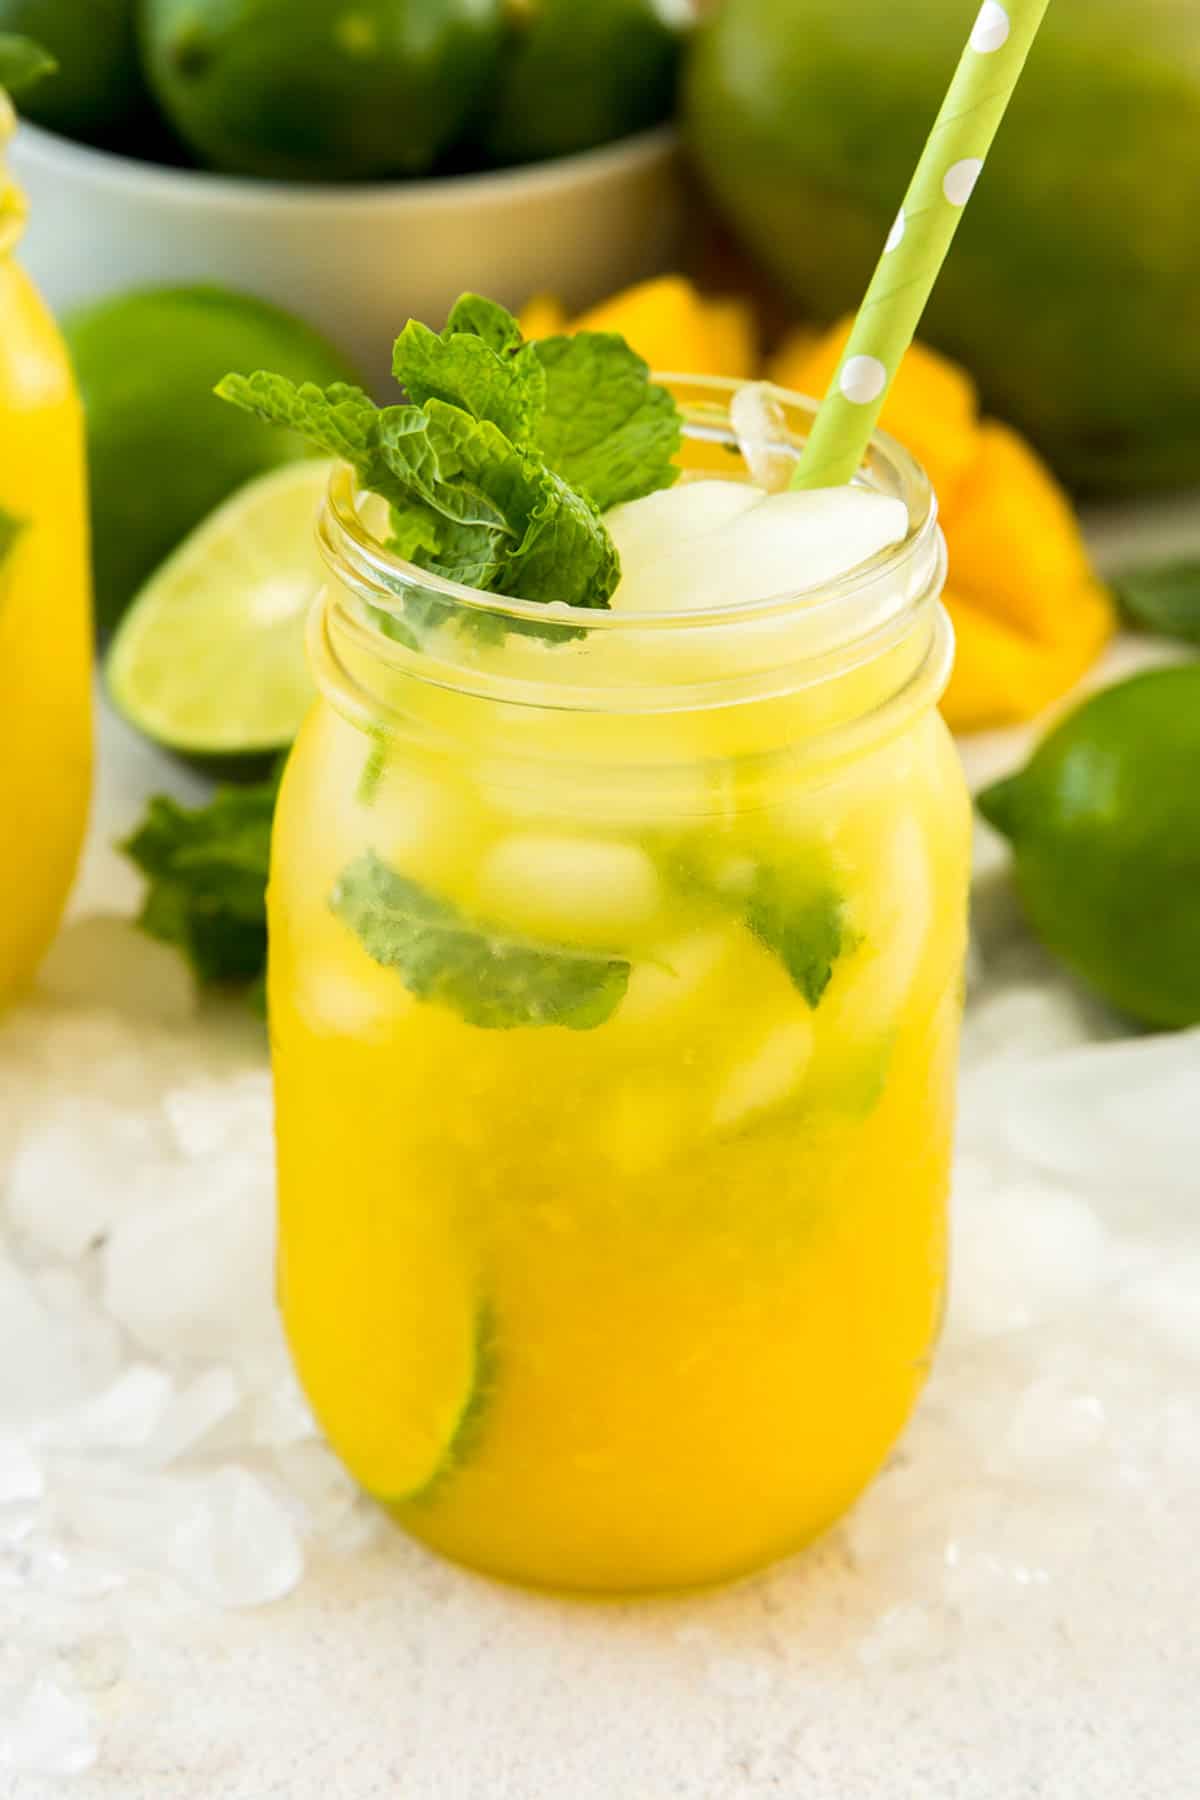 A mason jar filled with mango mojito and garnished with fresh mint leaves